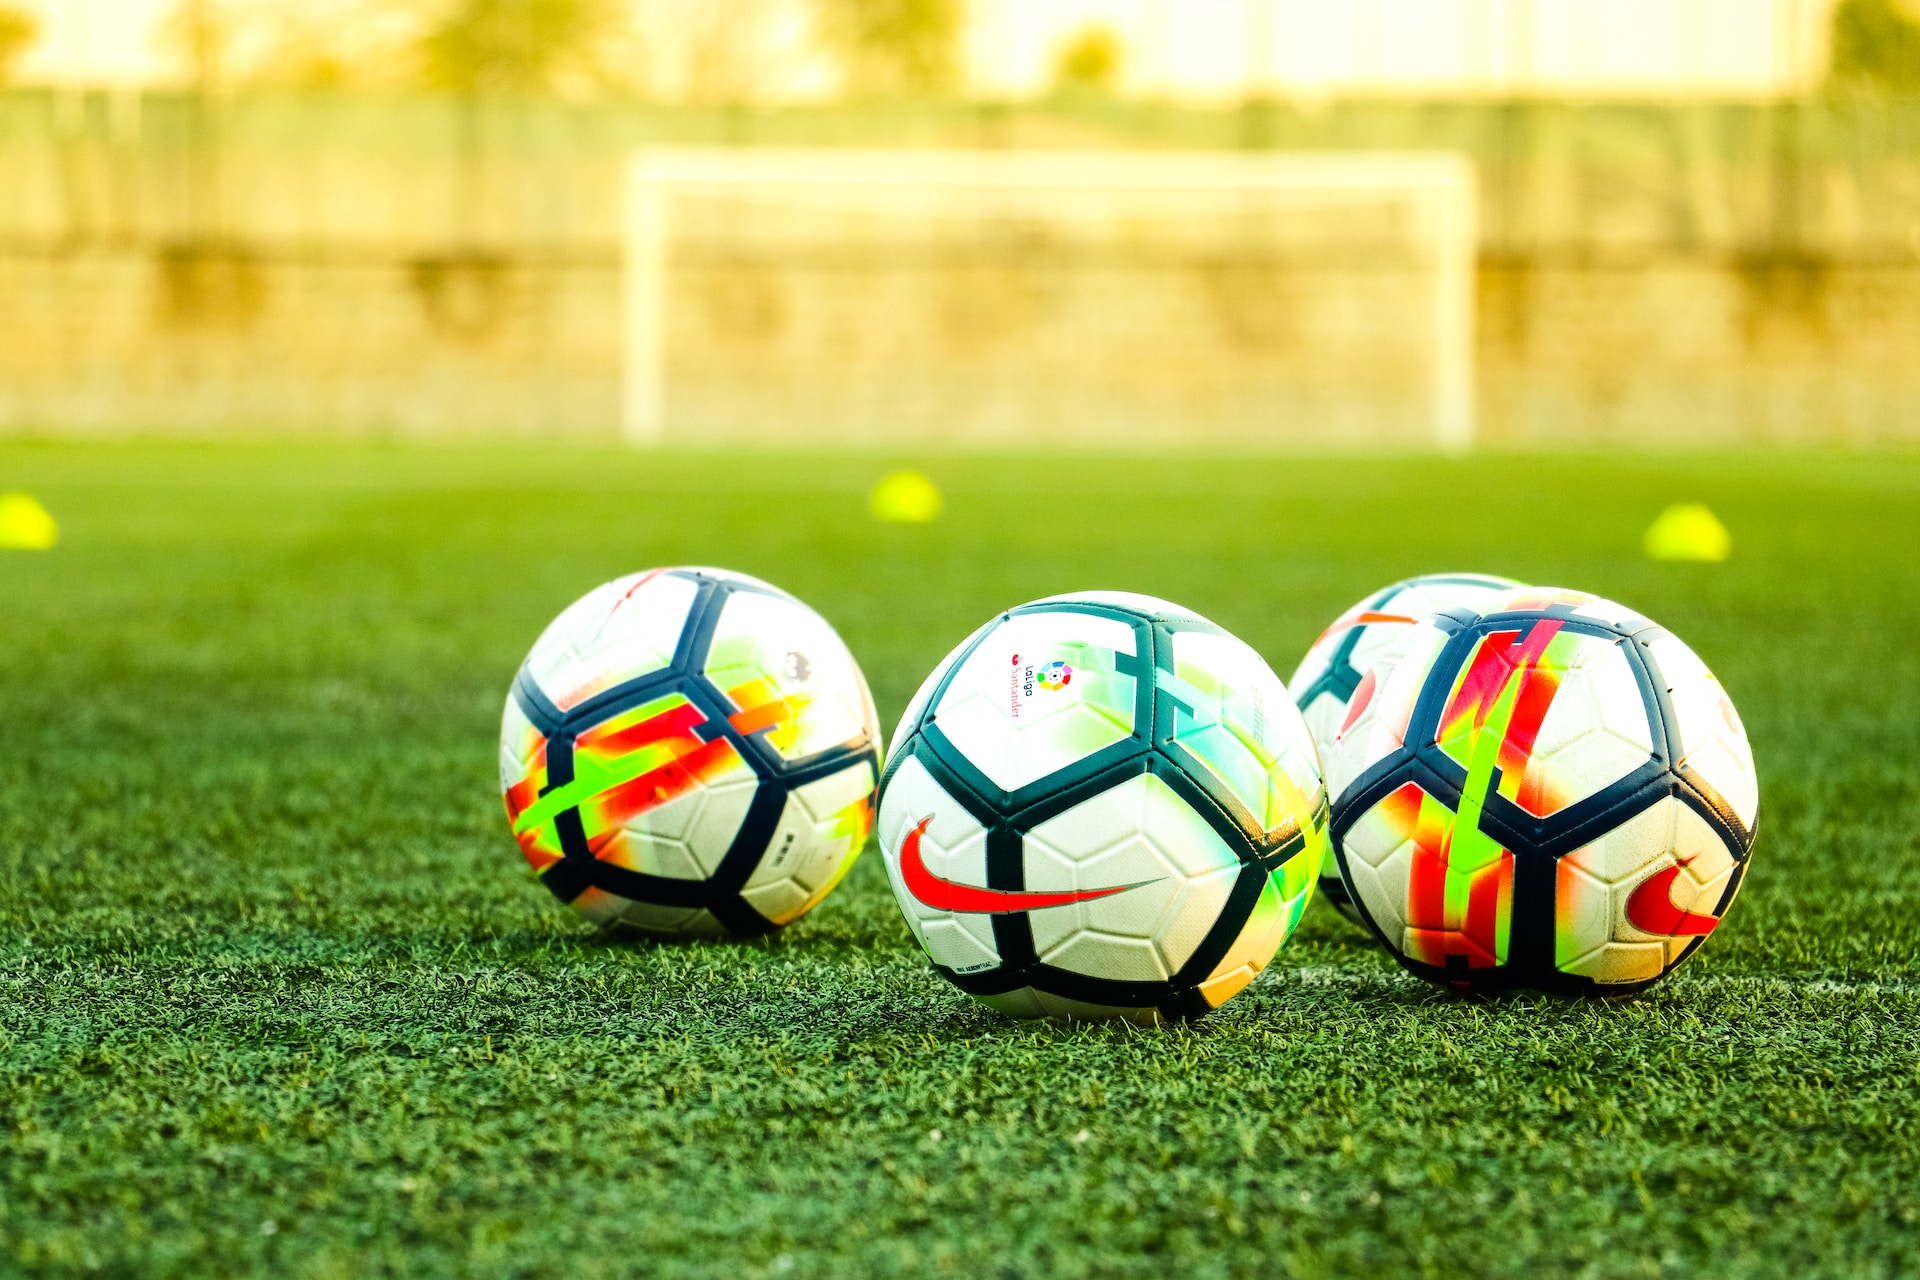 How to select soccer balls